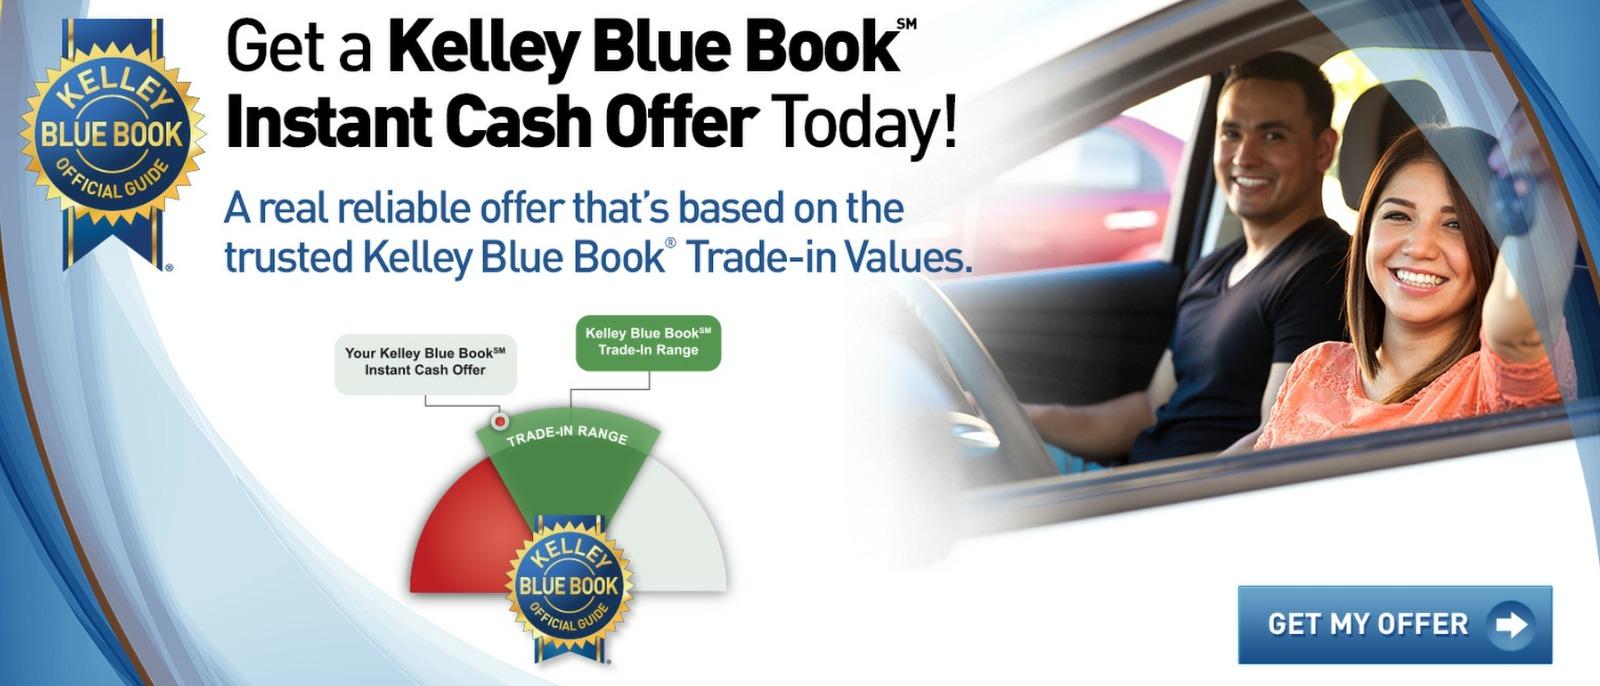 Get a Kelley Blue Book Instant Cash Offer Today!
A real reliable offer that's based on the trusted Kelley Blue Book Trade-in Values. 
Click to "Get My Offer" today.